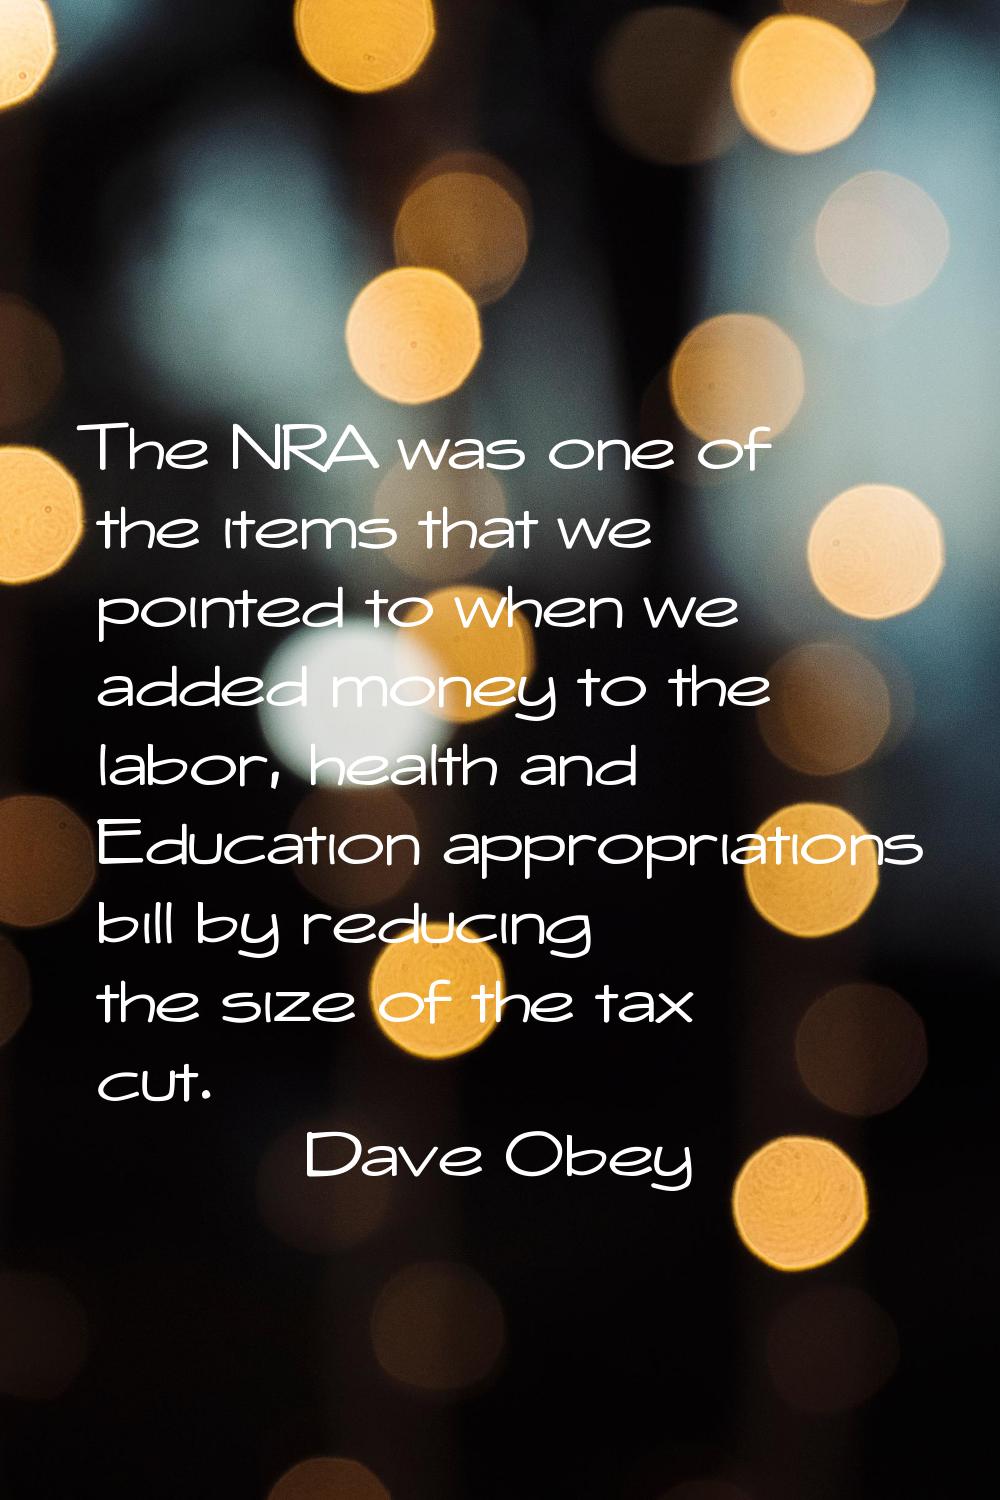 The NRA was one of the items that we pointed to when we added money to the labor, health and Educat